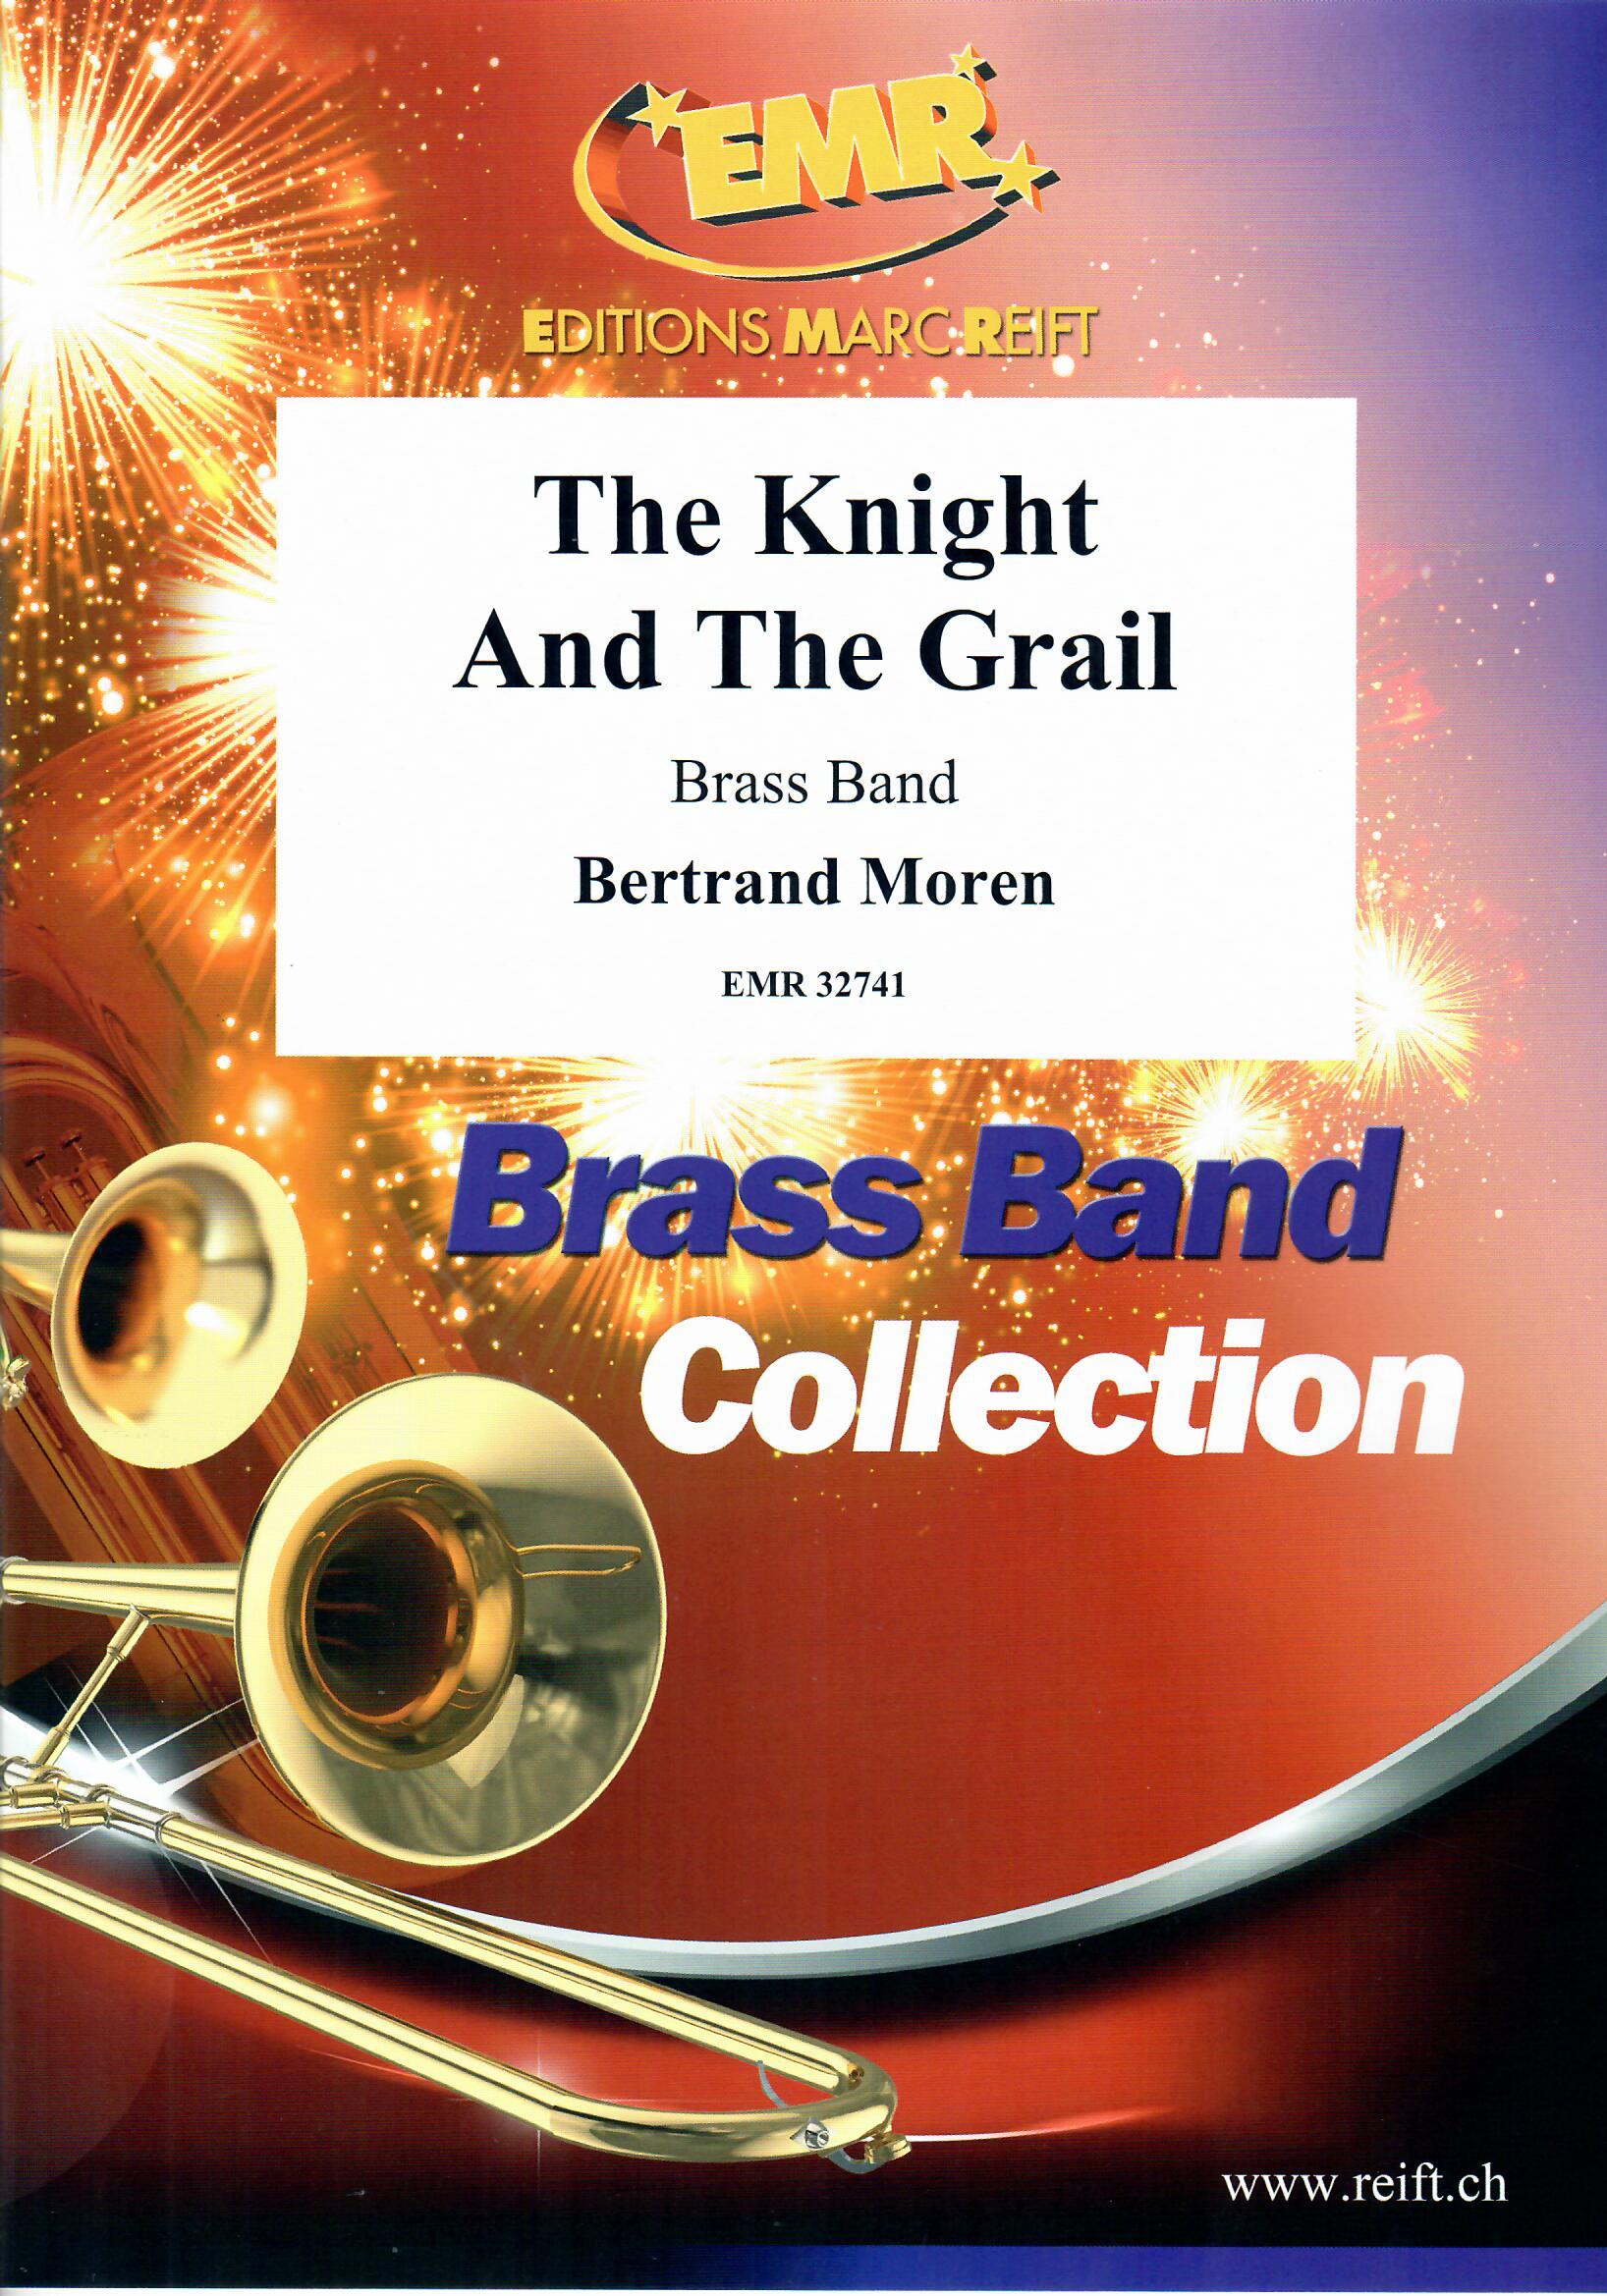 THE KNIGHT AND THE GRAIL, NEW & RECENT Publications, LIGHT CONCERT MUSIC